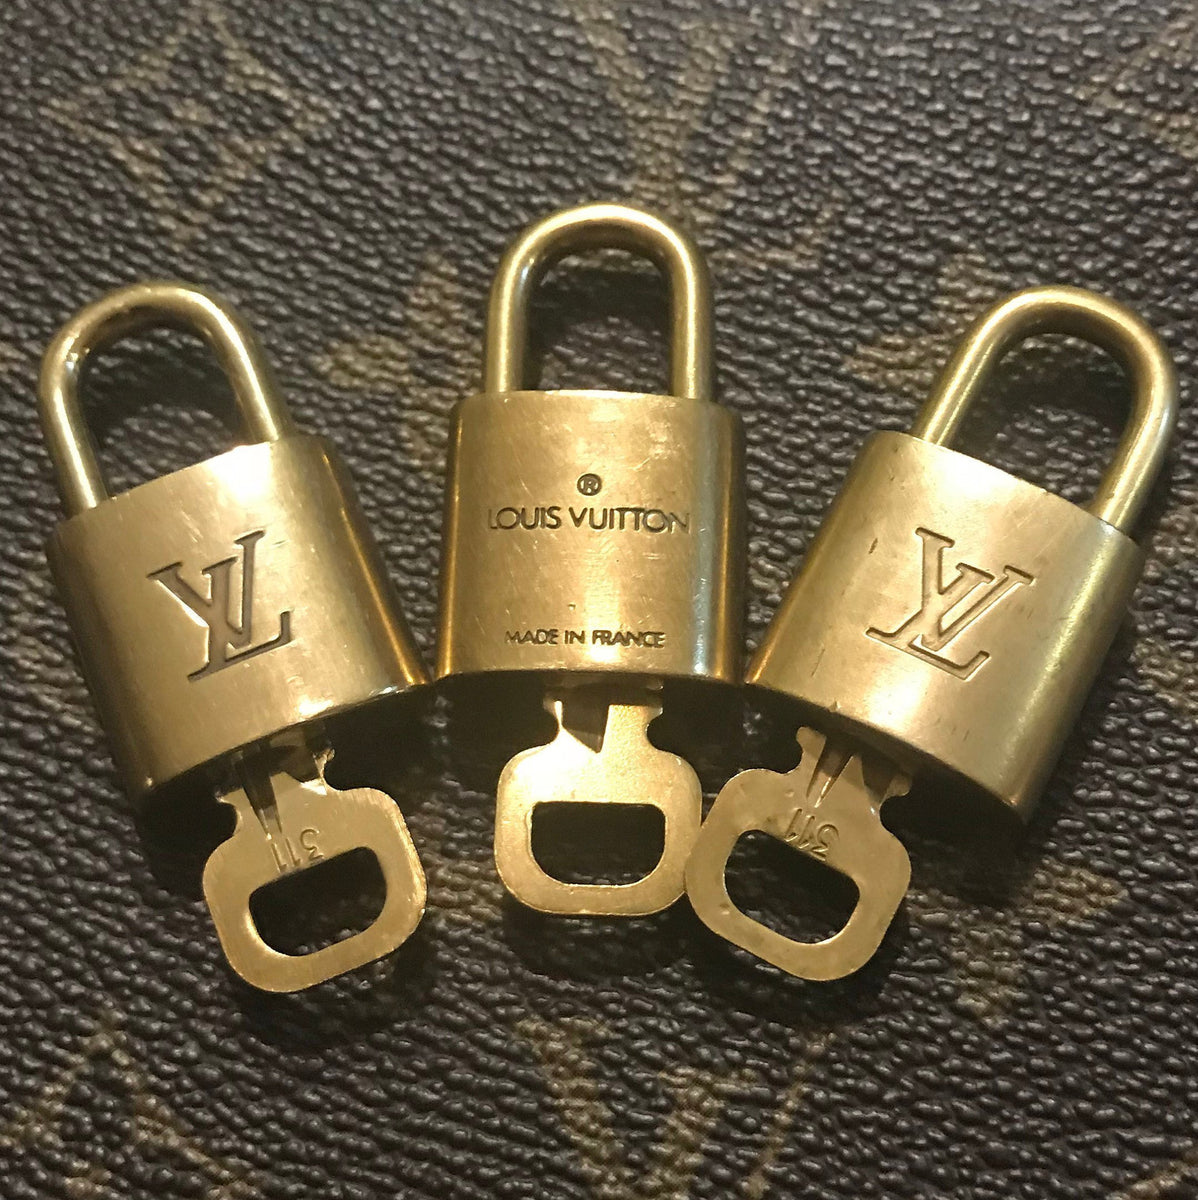 New Authentic Louis Vuitton PadLock Lock & Key for Bags Gold # 677